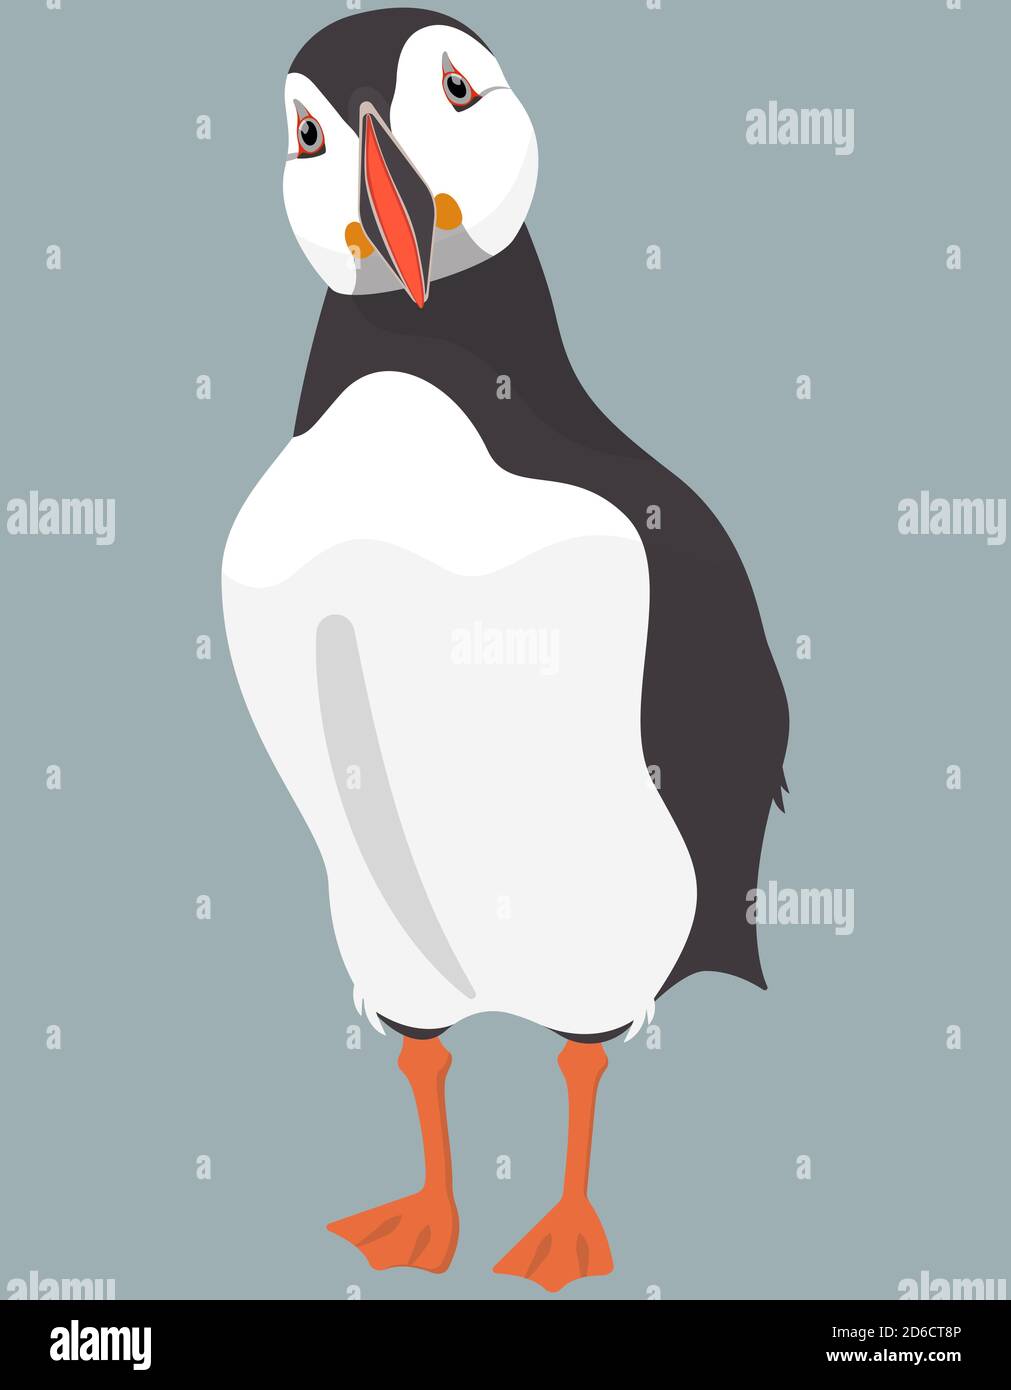 Atlantic puffin front view. Northern bird in cartoon style. Stock Vector